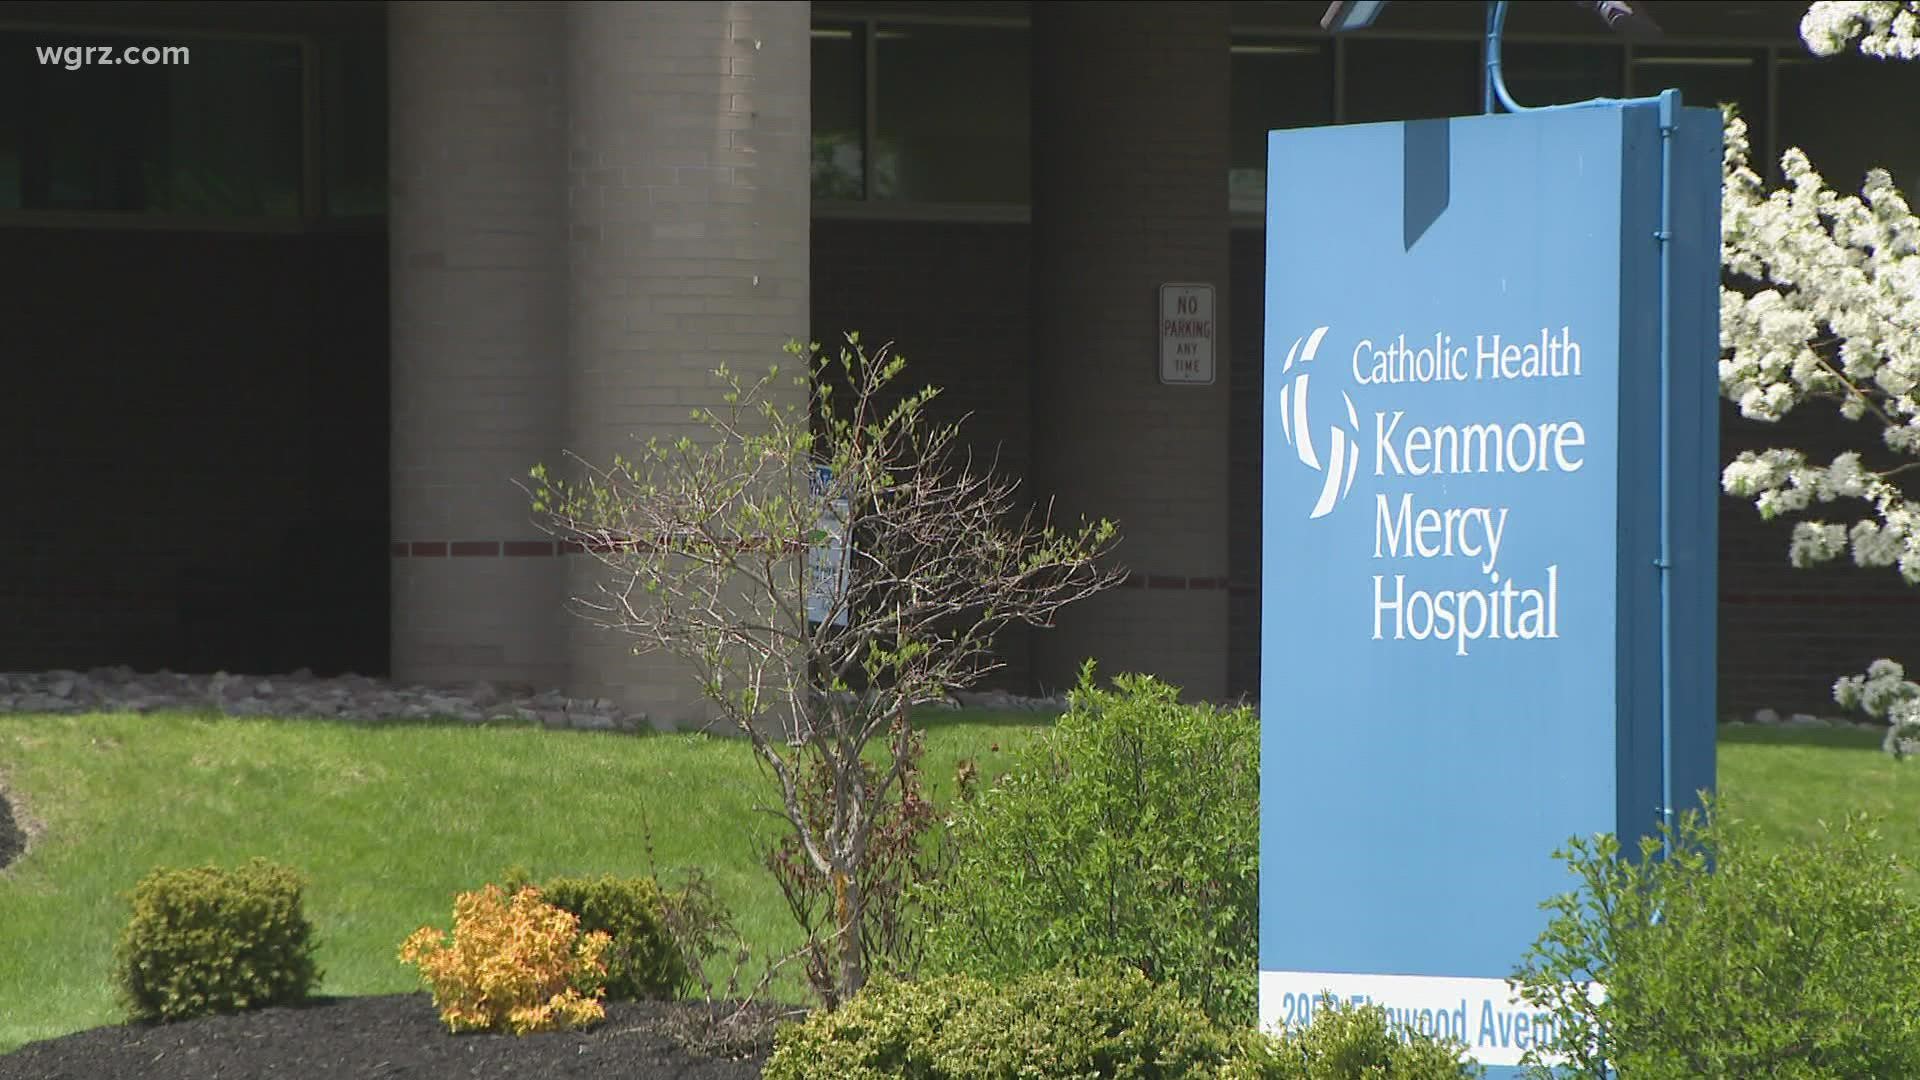 Catholic Health credits high ratings in the patient experience and infection control measure categories for its good grades.